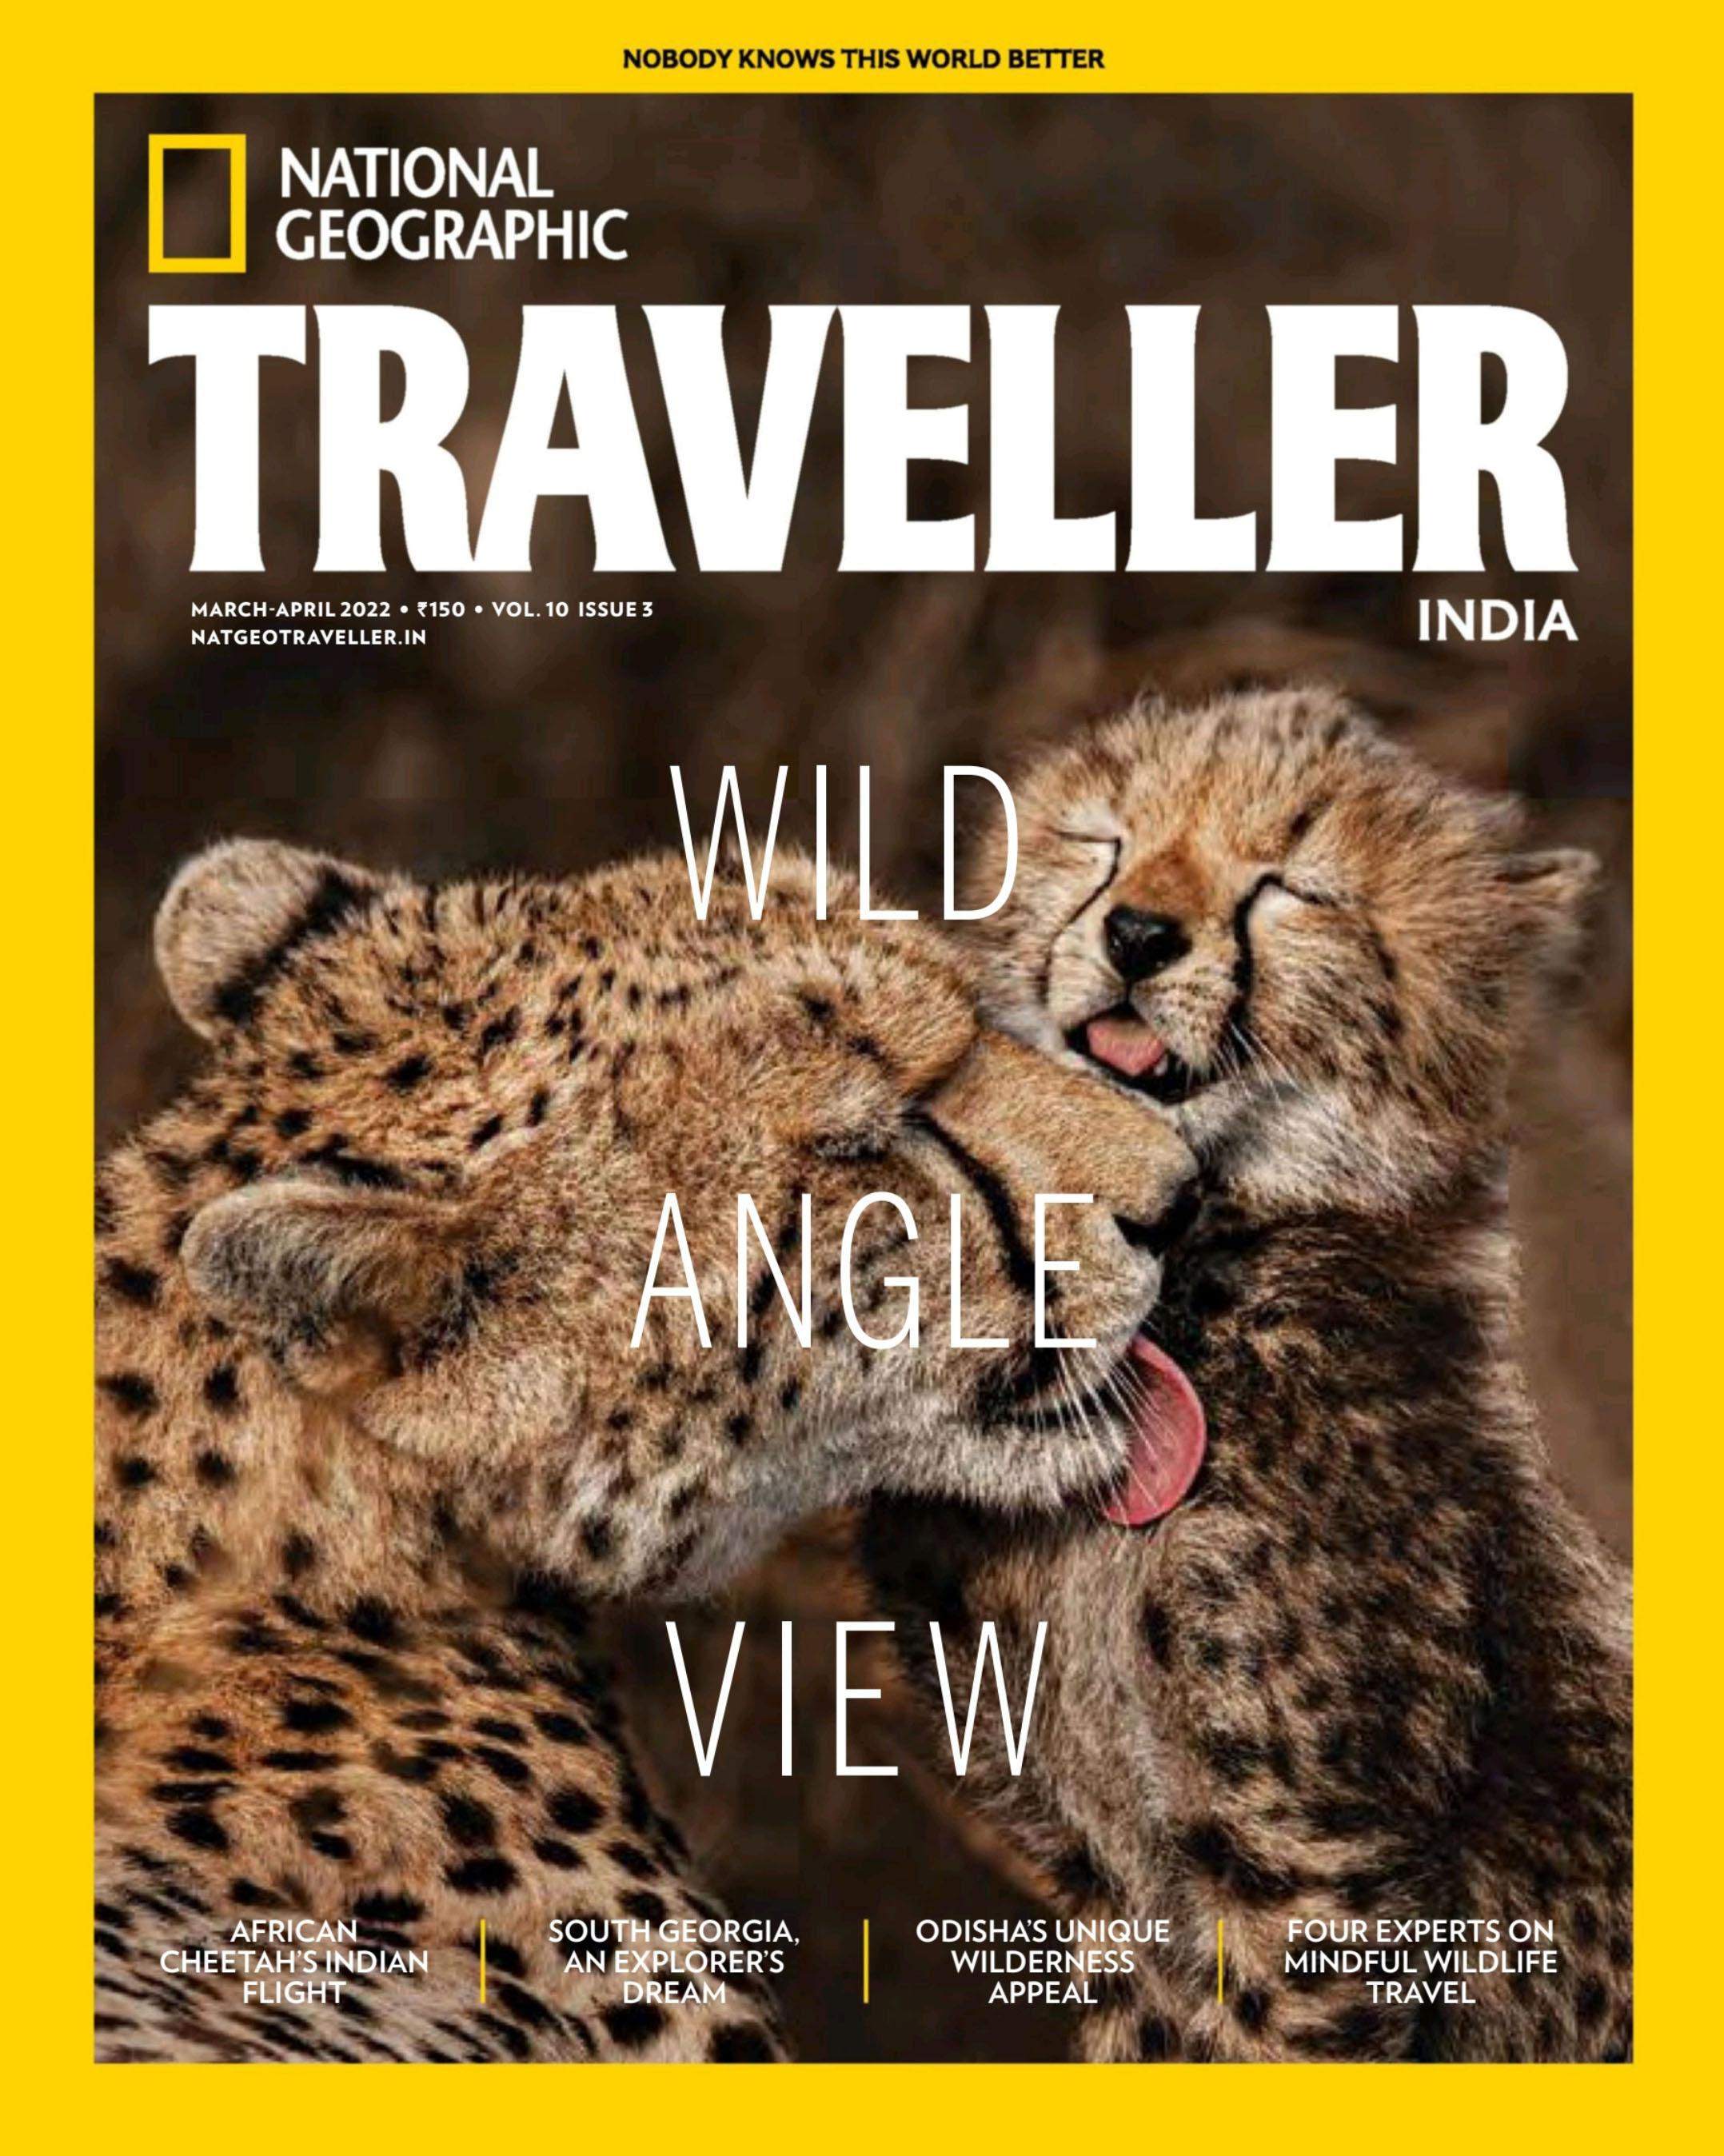 National Geographic Traveller India-March April 2022